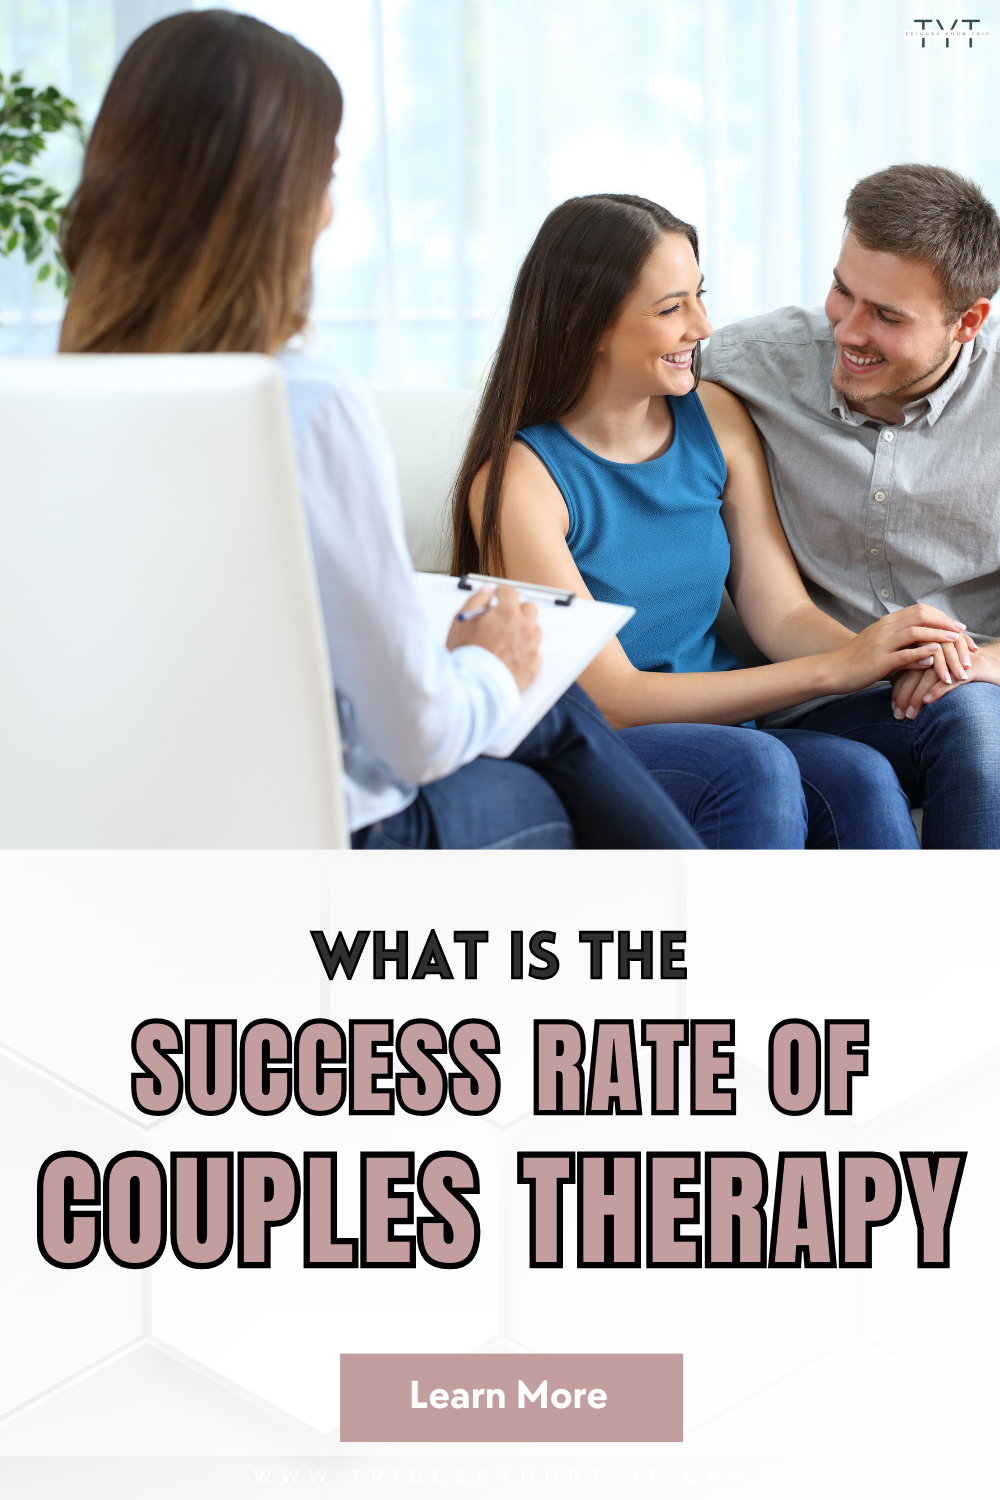 marriage counseling costs and marriage counseling